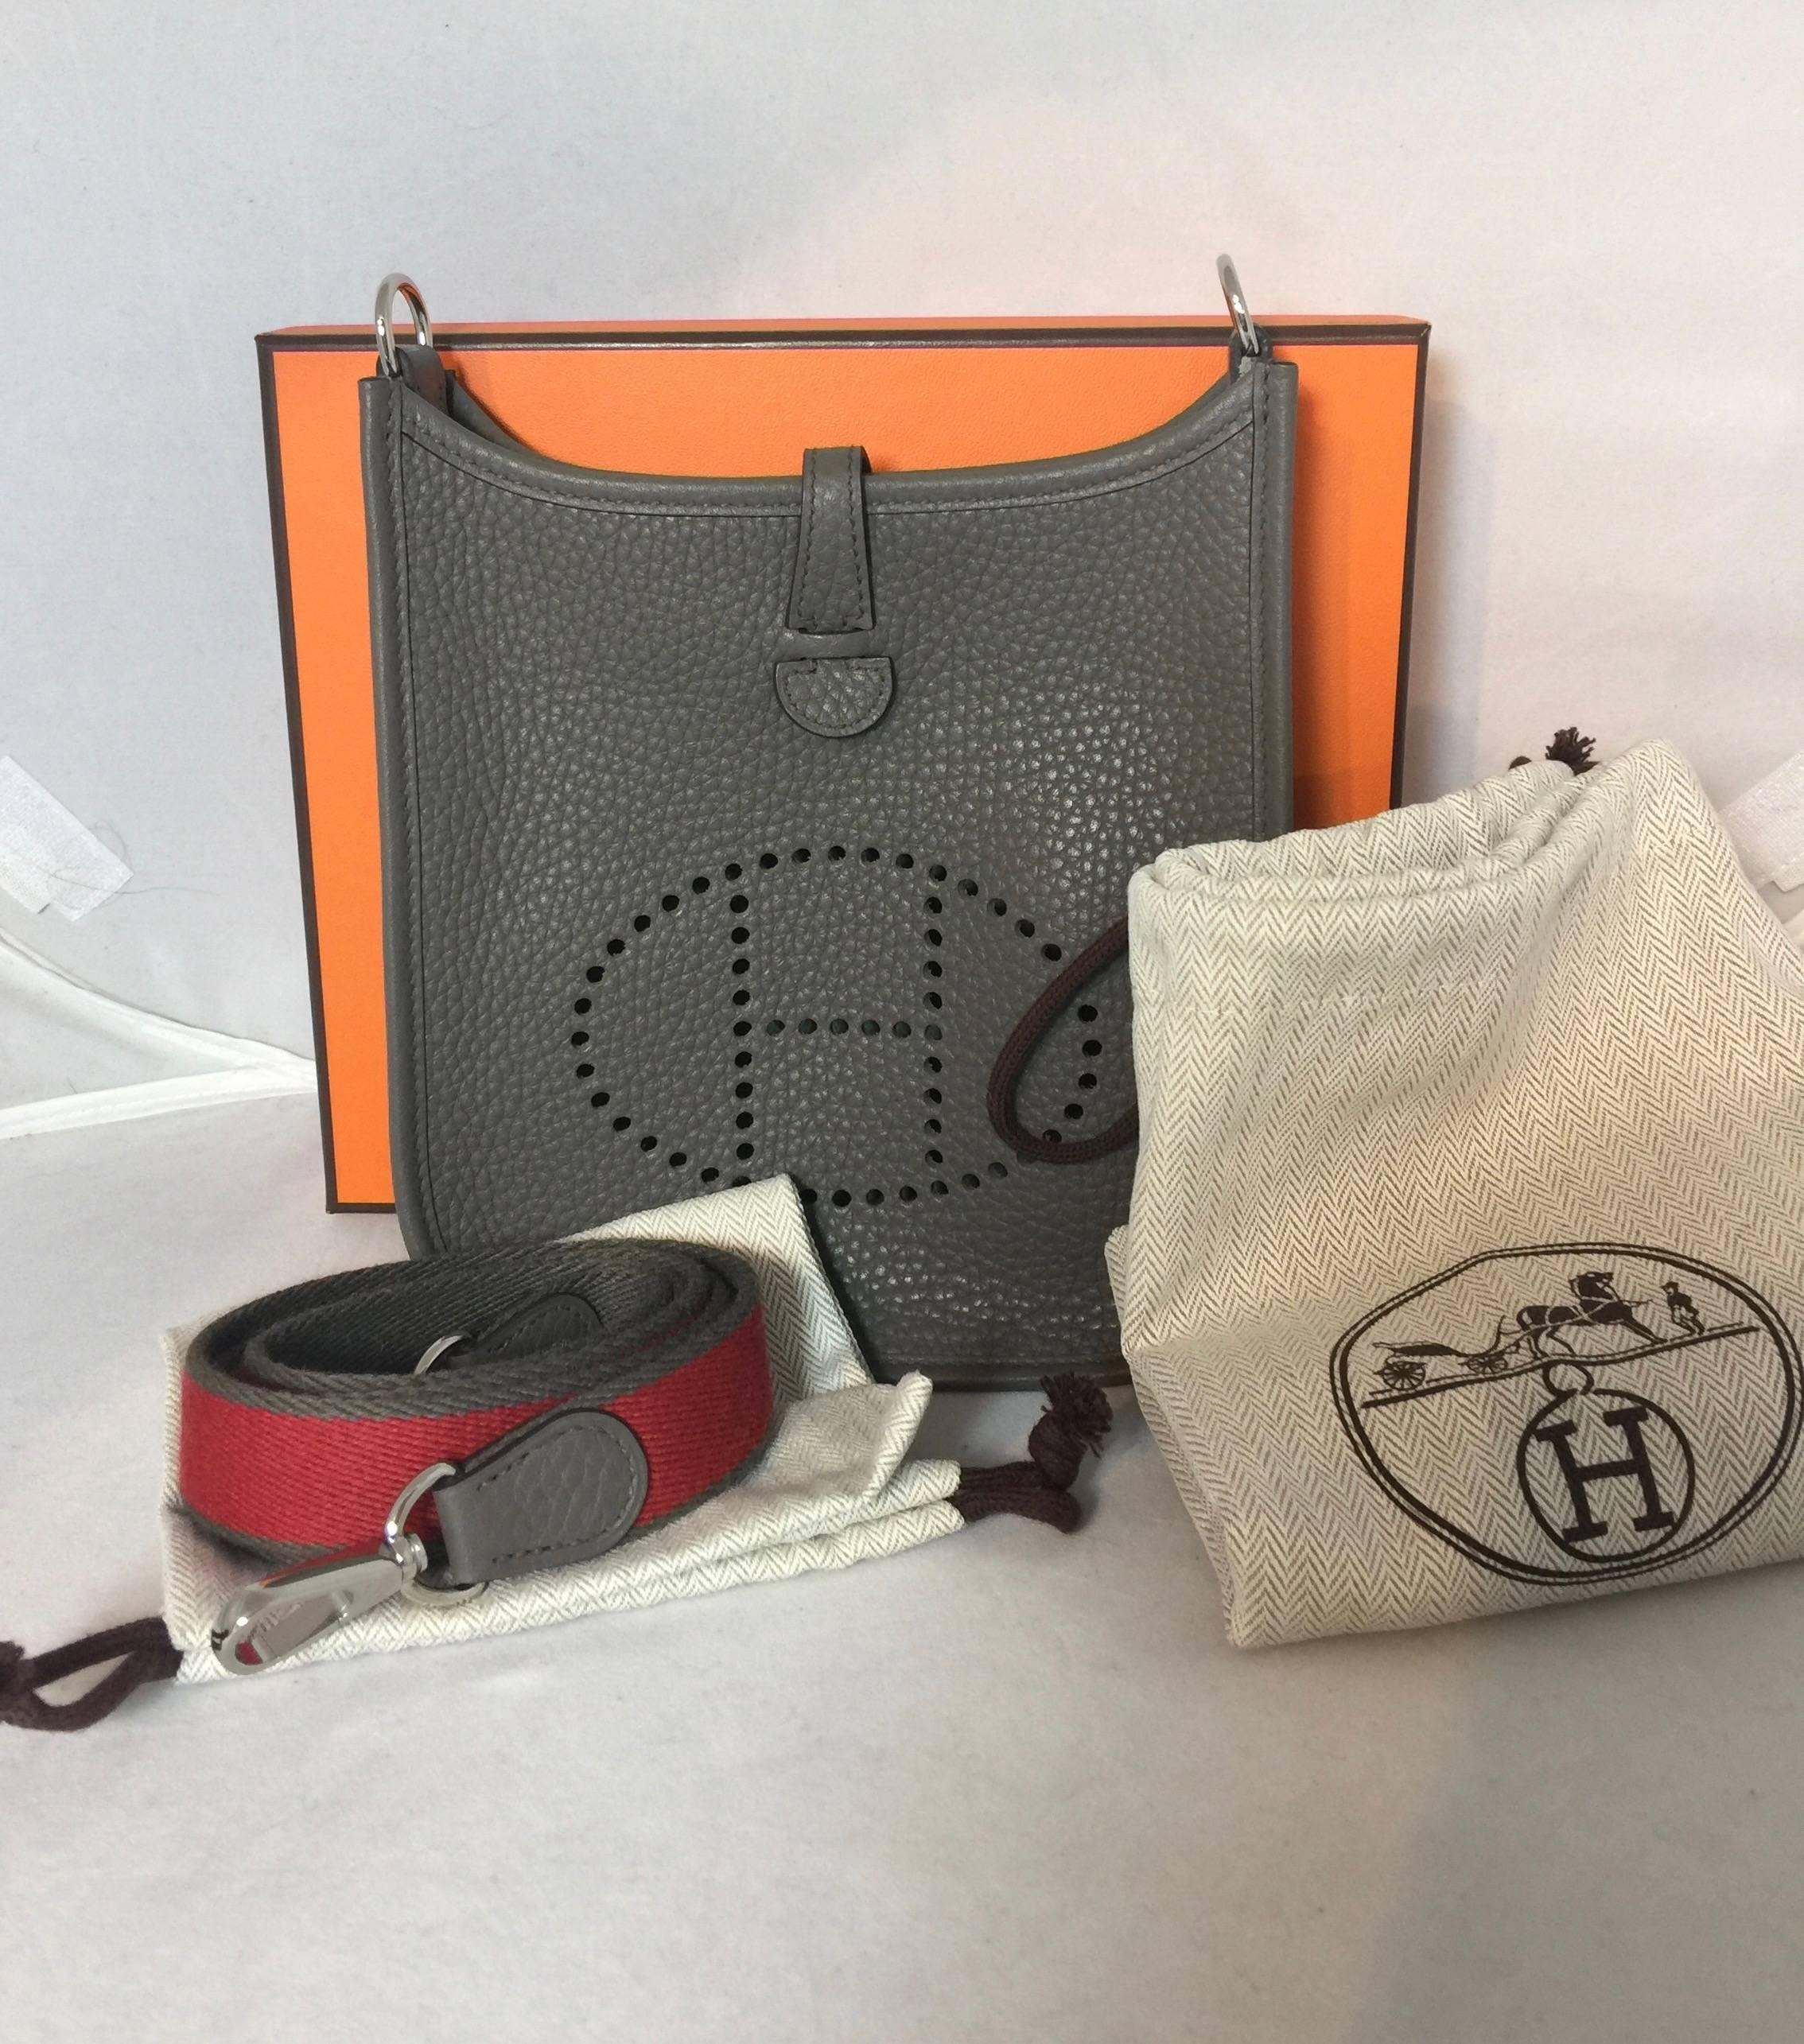 Brand new in box Hermes 2016 Etain Evelyne TPM in Clemence leather with removable 2 color grey/red strap. 

This bag in the new color Etain (gray) is waitlisted 8 months to 1 year and is extremely hard to get. 

Bag comes with original box, Bag,